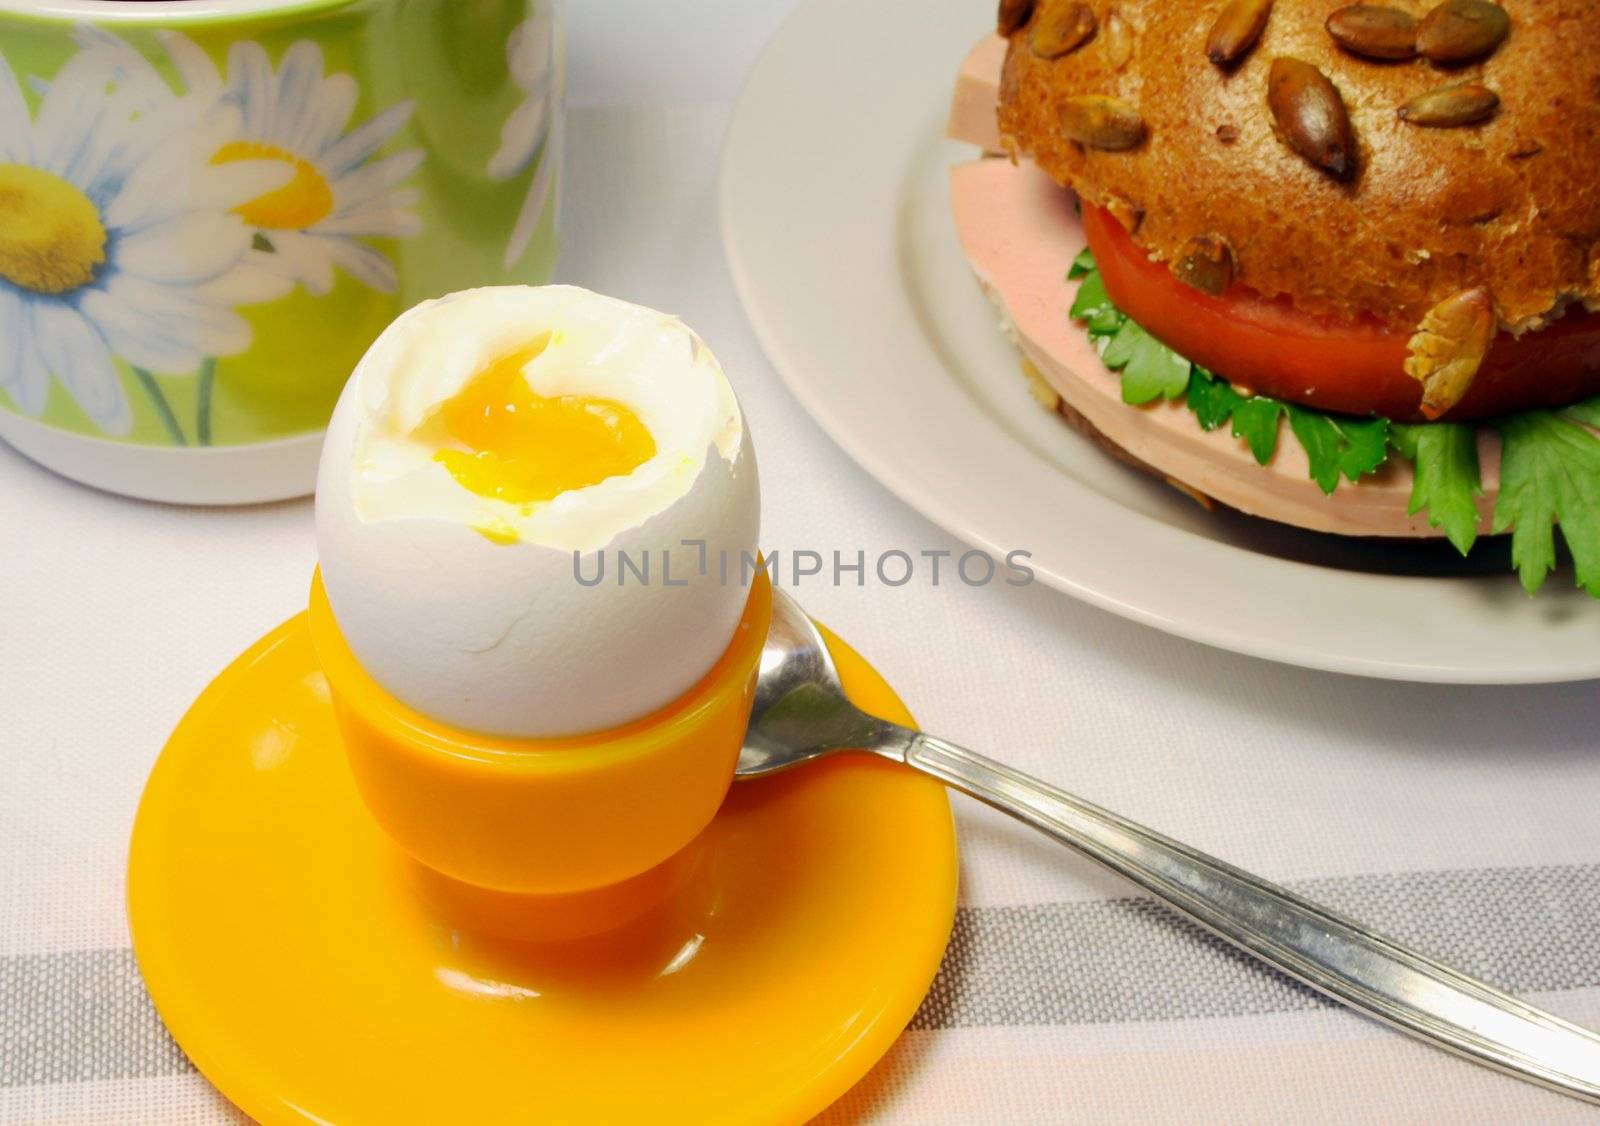 Breakfast from cooked eggs, a sandwich with sausage, a tomato and a parsley and cups of tea.